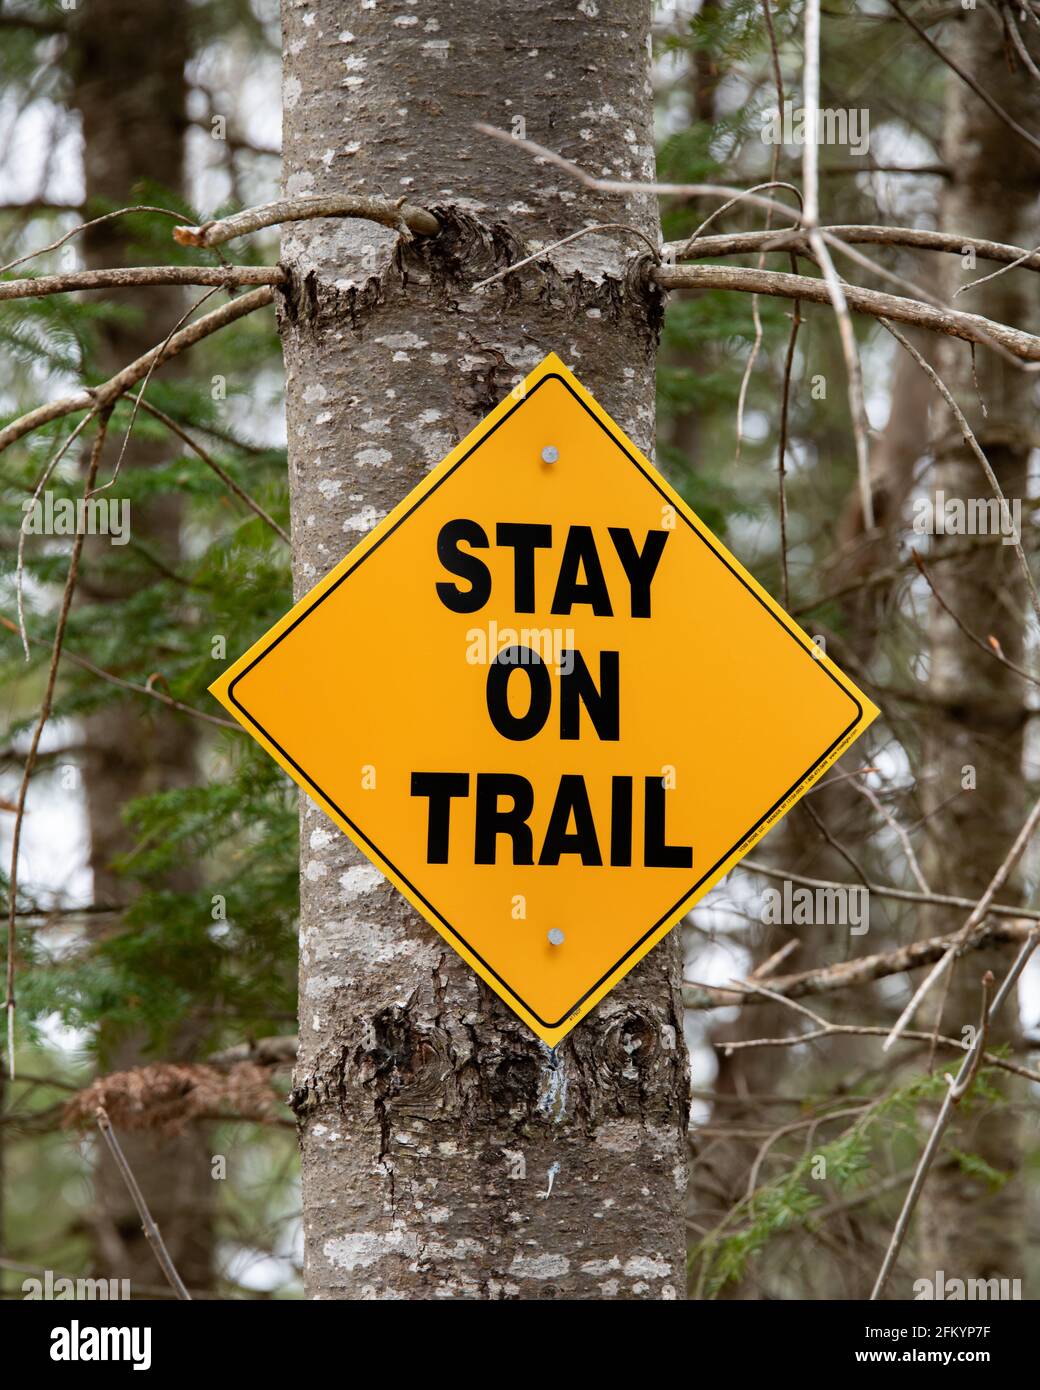 A bright yellow sign on an Adirondack hiking and snowmobile trail advising people to stay on the trail to avoid trespassing on private property. Stock Photo